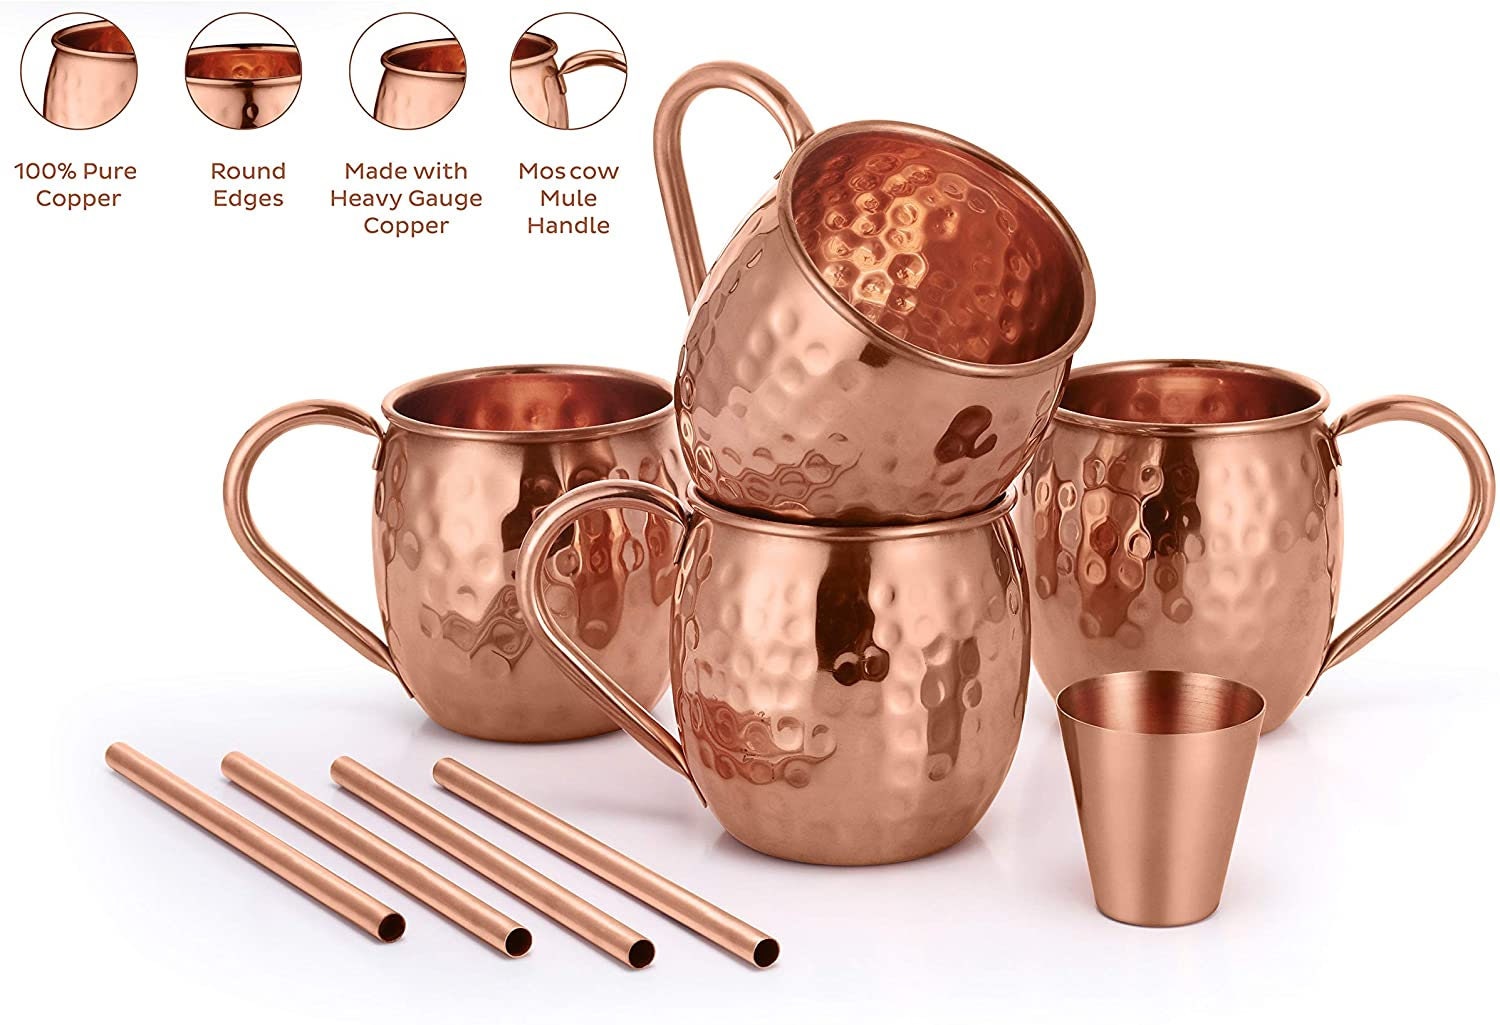 14 oz. Moscow Mule Mugs w/ Hammered Copper Finish - 4/Pack